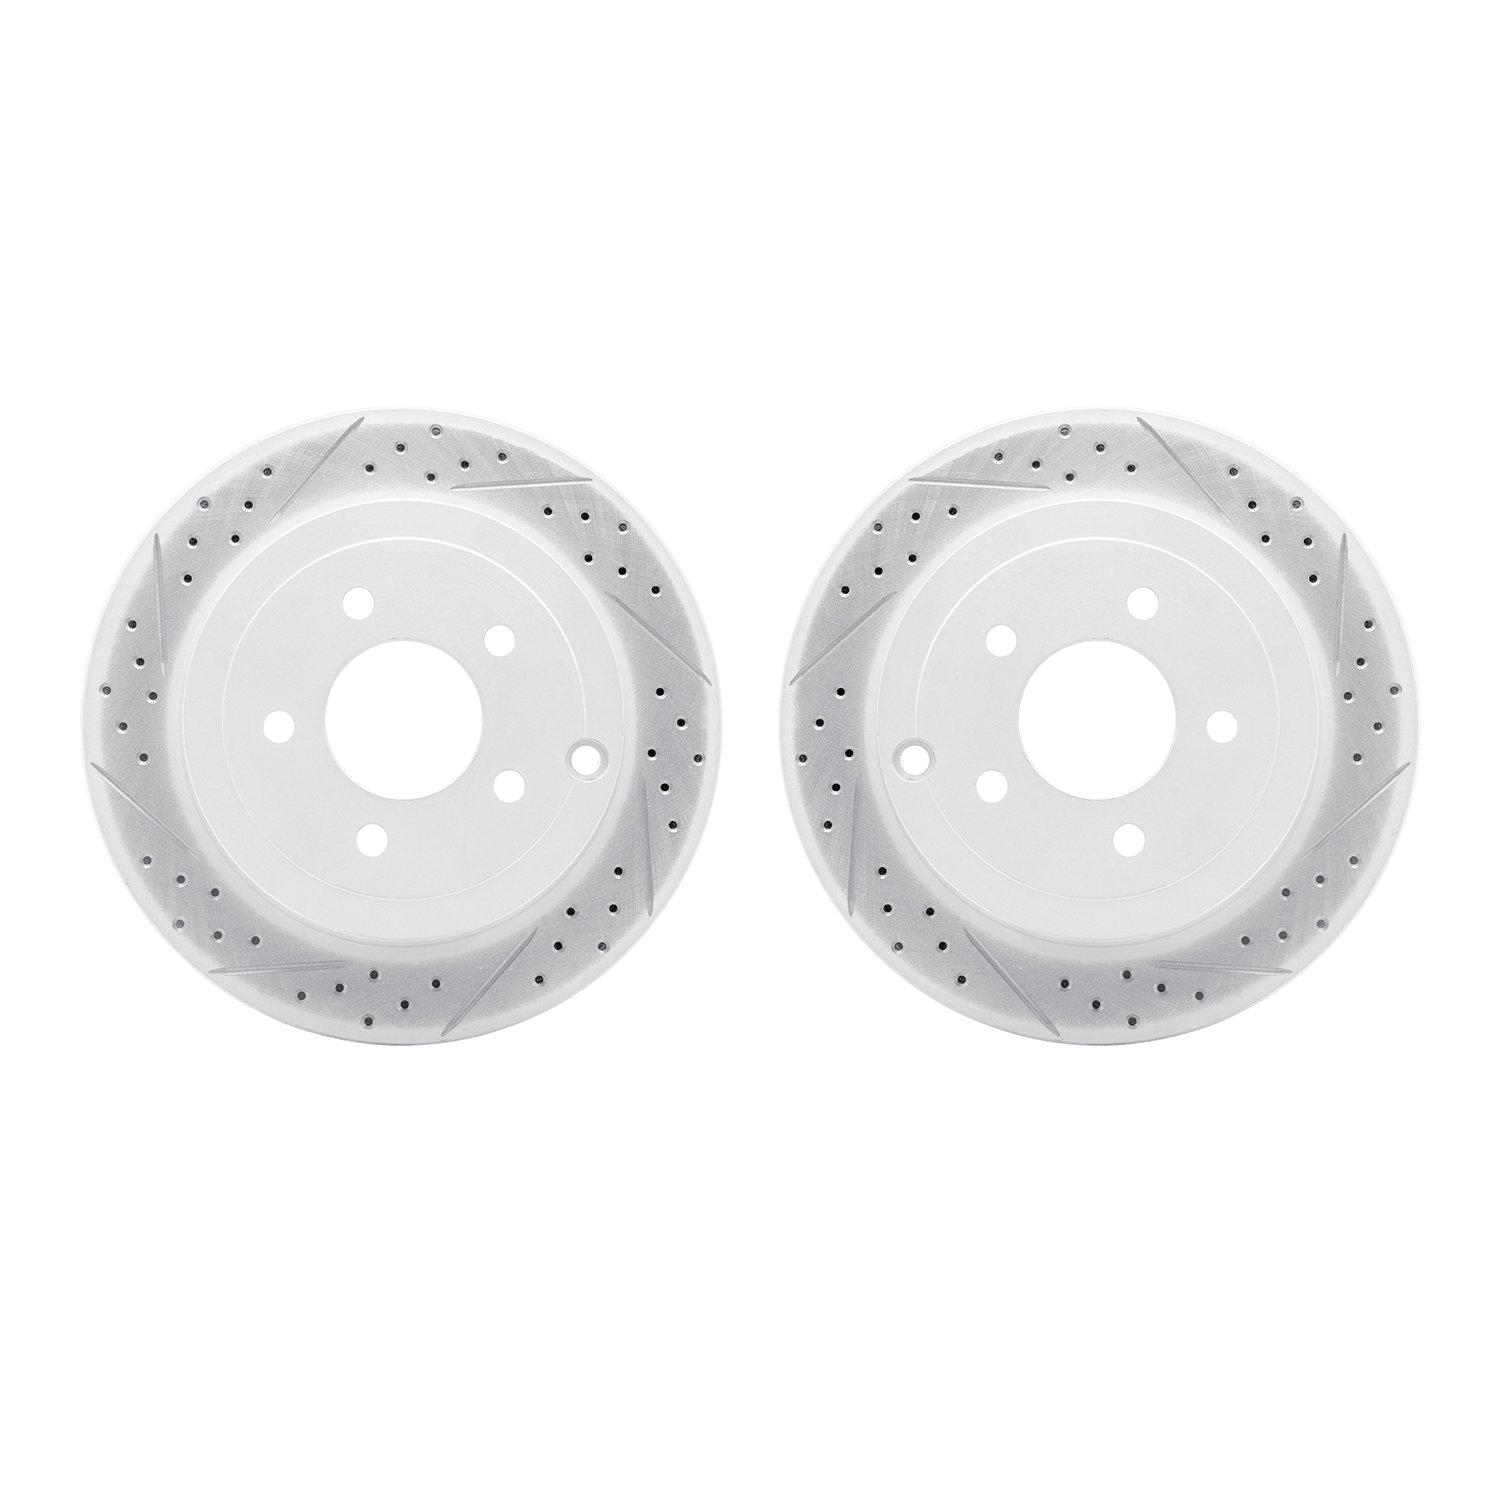 2002-54129 Geoperformance Drilled/Slotted Brake Rotors, 2007-2010 Ford/Lincoln/Mercury/Mazda, Position: Rear